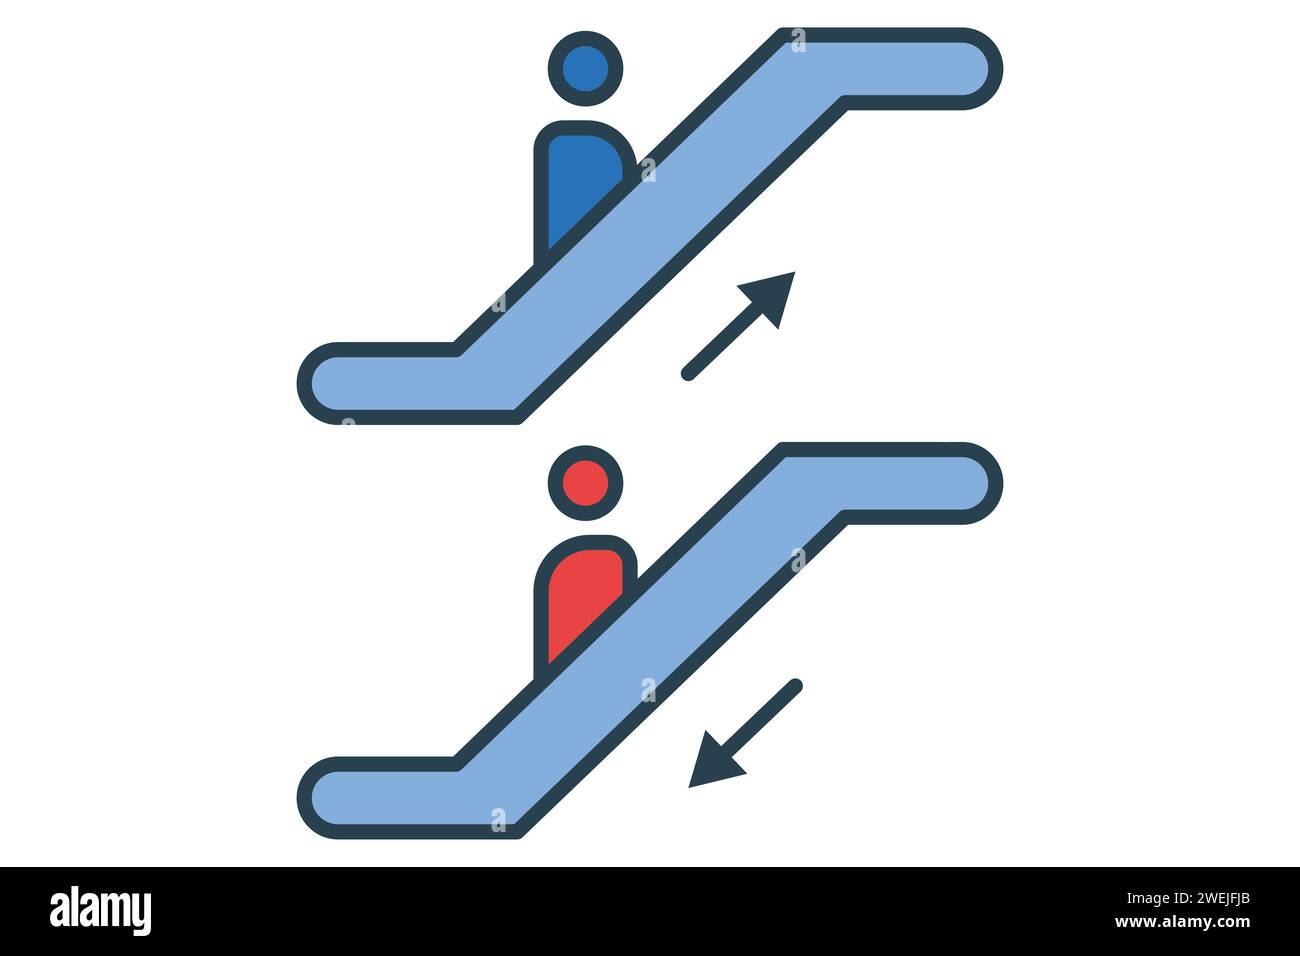 escalator icon. icon related to indoor navigation in public spaces. flat line icon style. element illustration Stock Vector